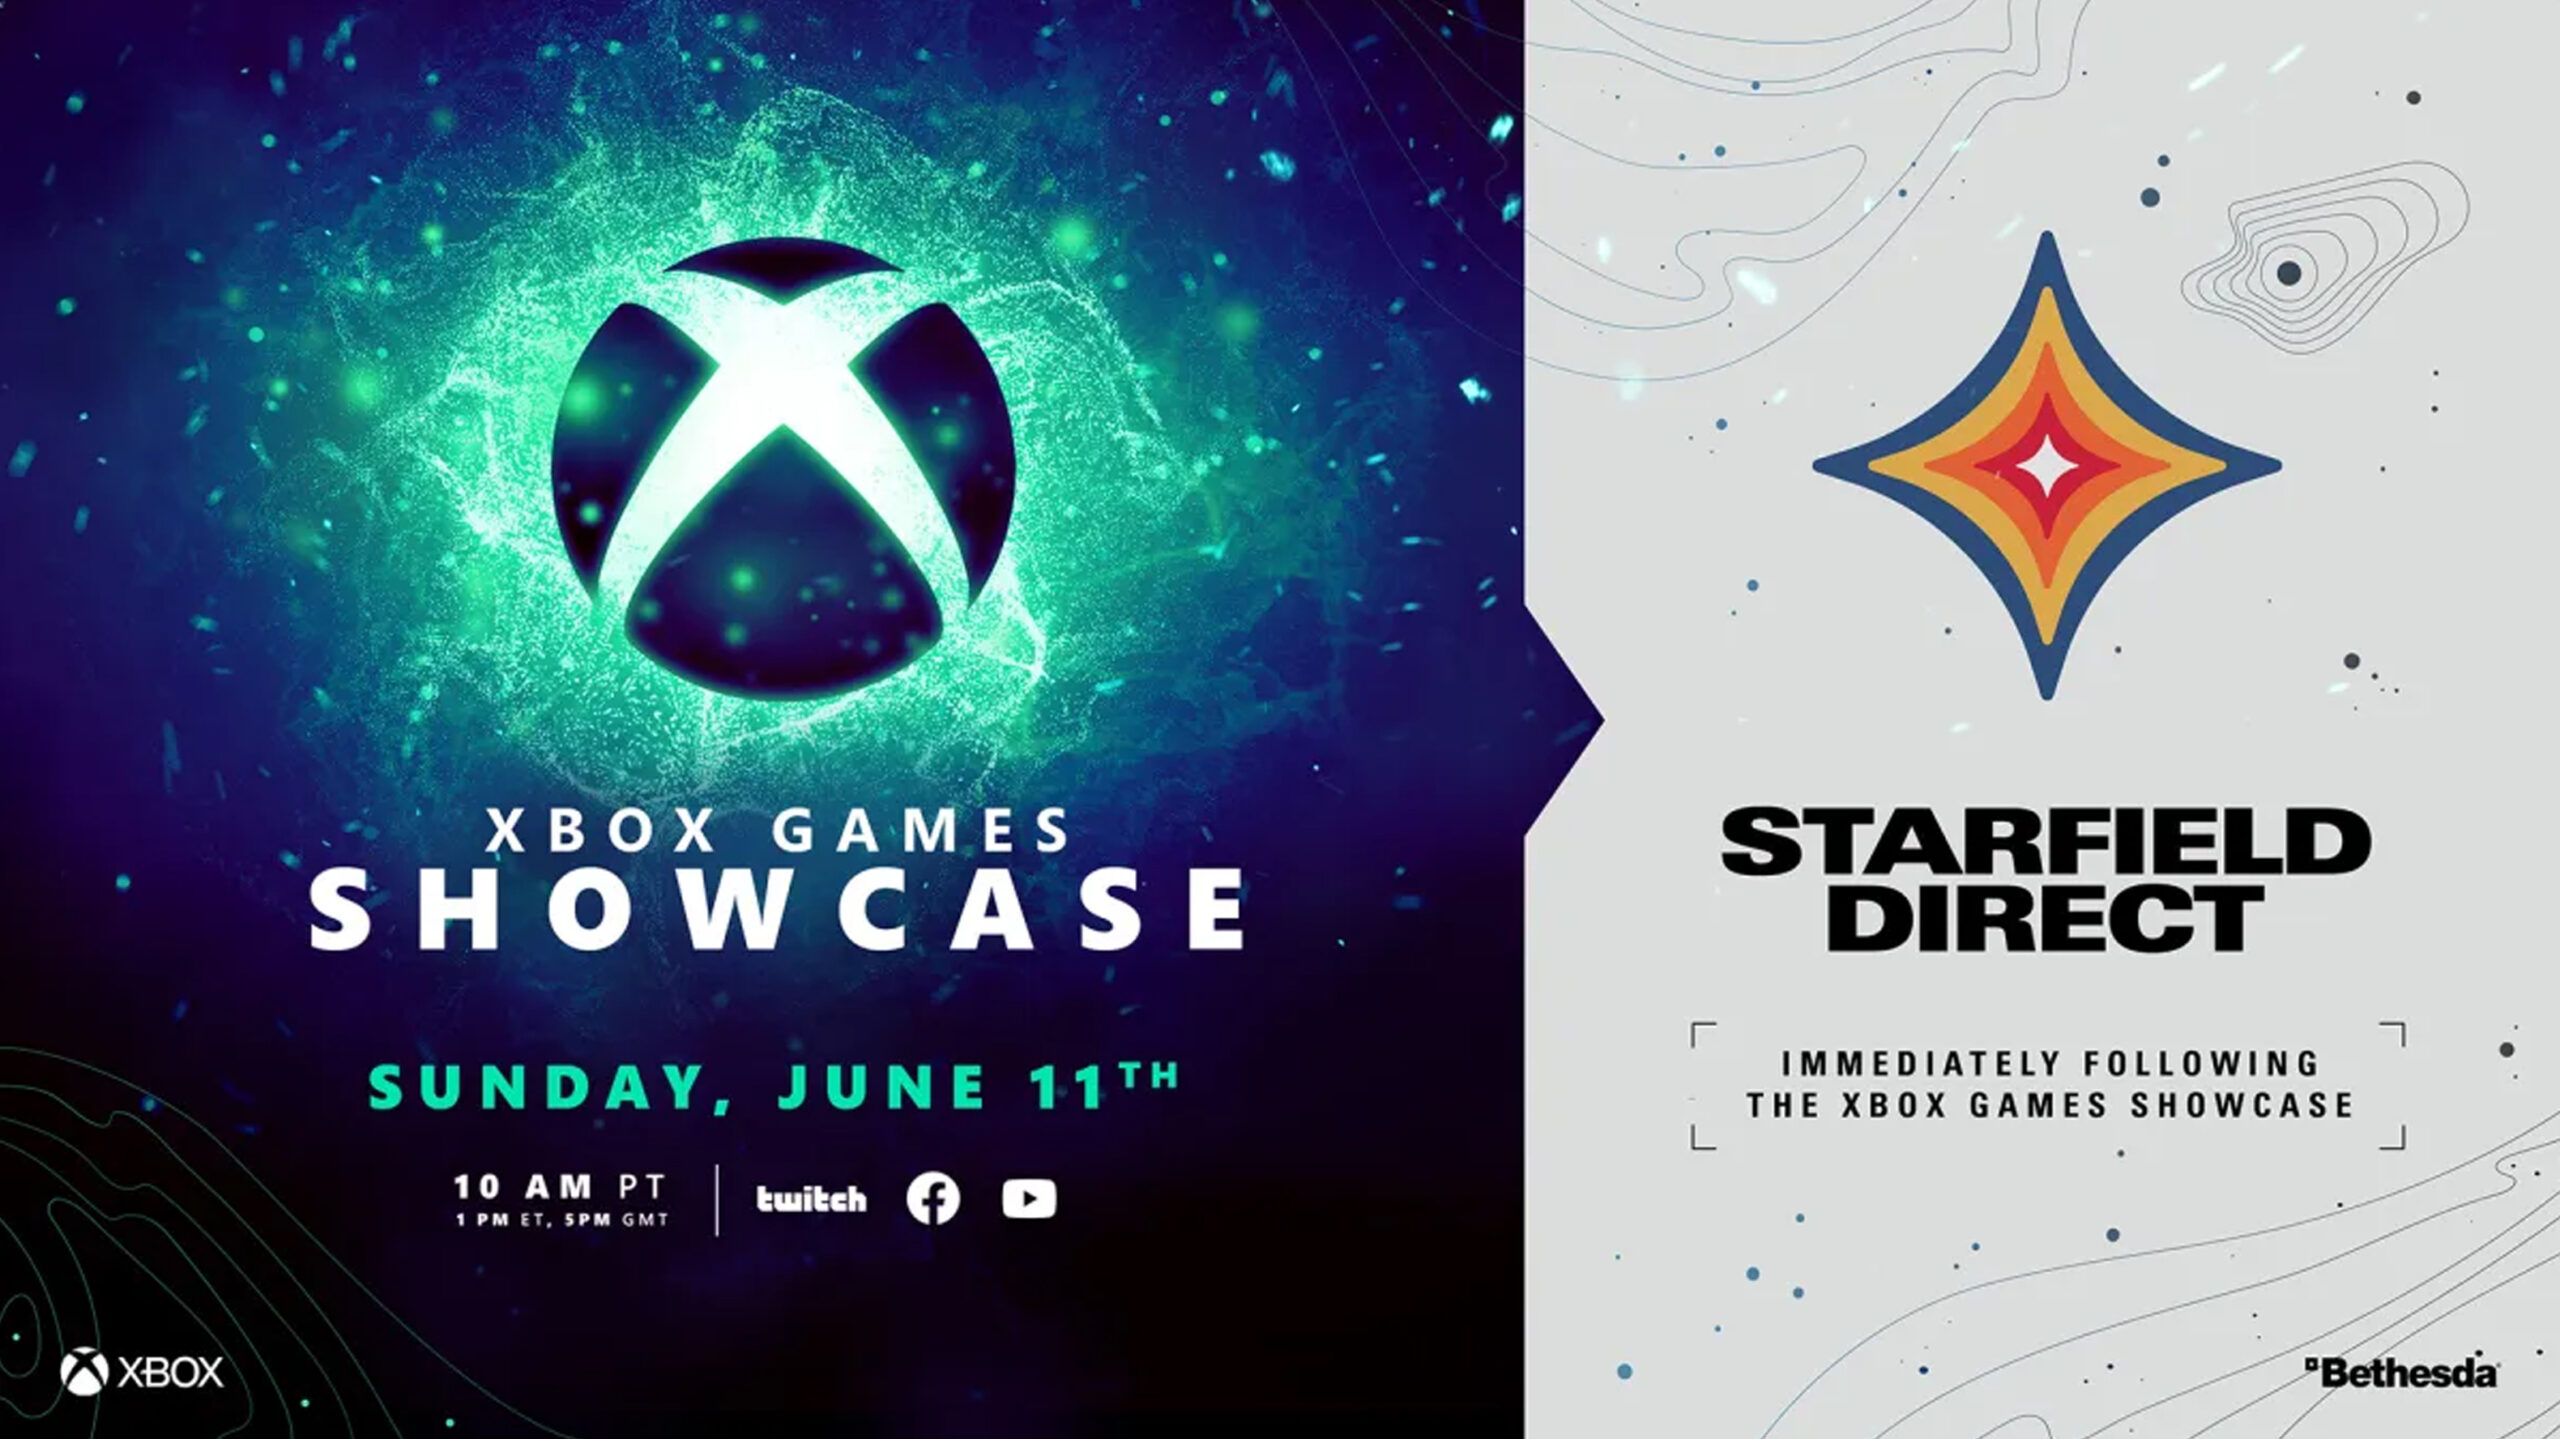 Xbox reveals plans for Xbox Games Showcase, Starfield Direct